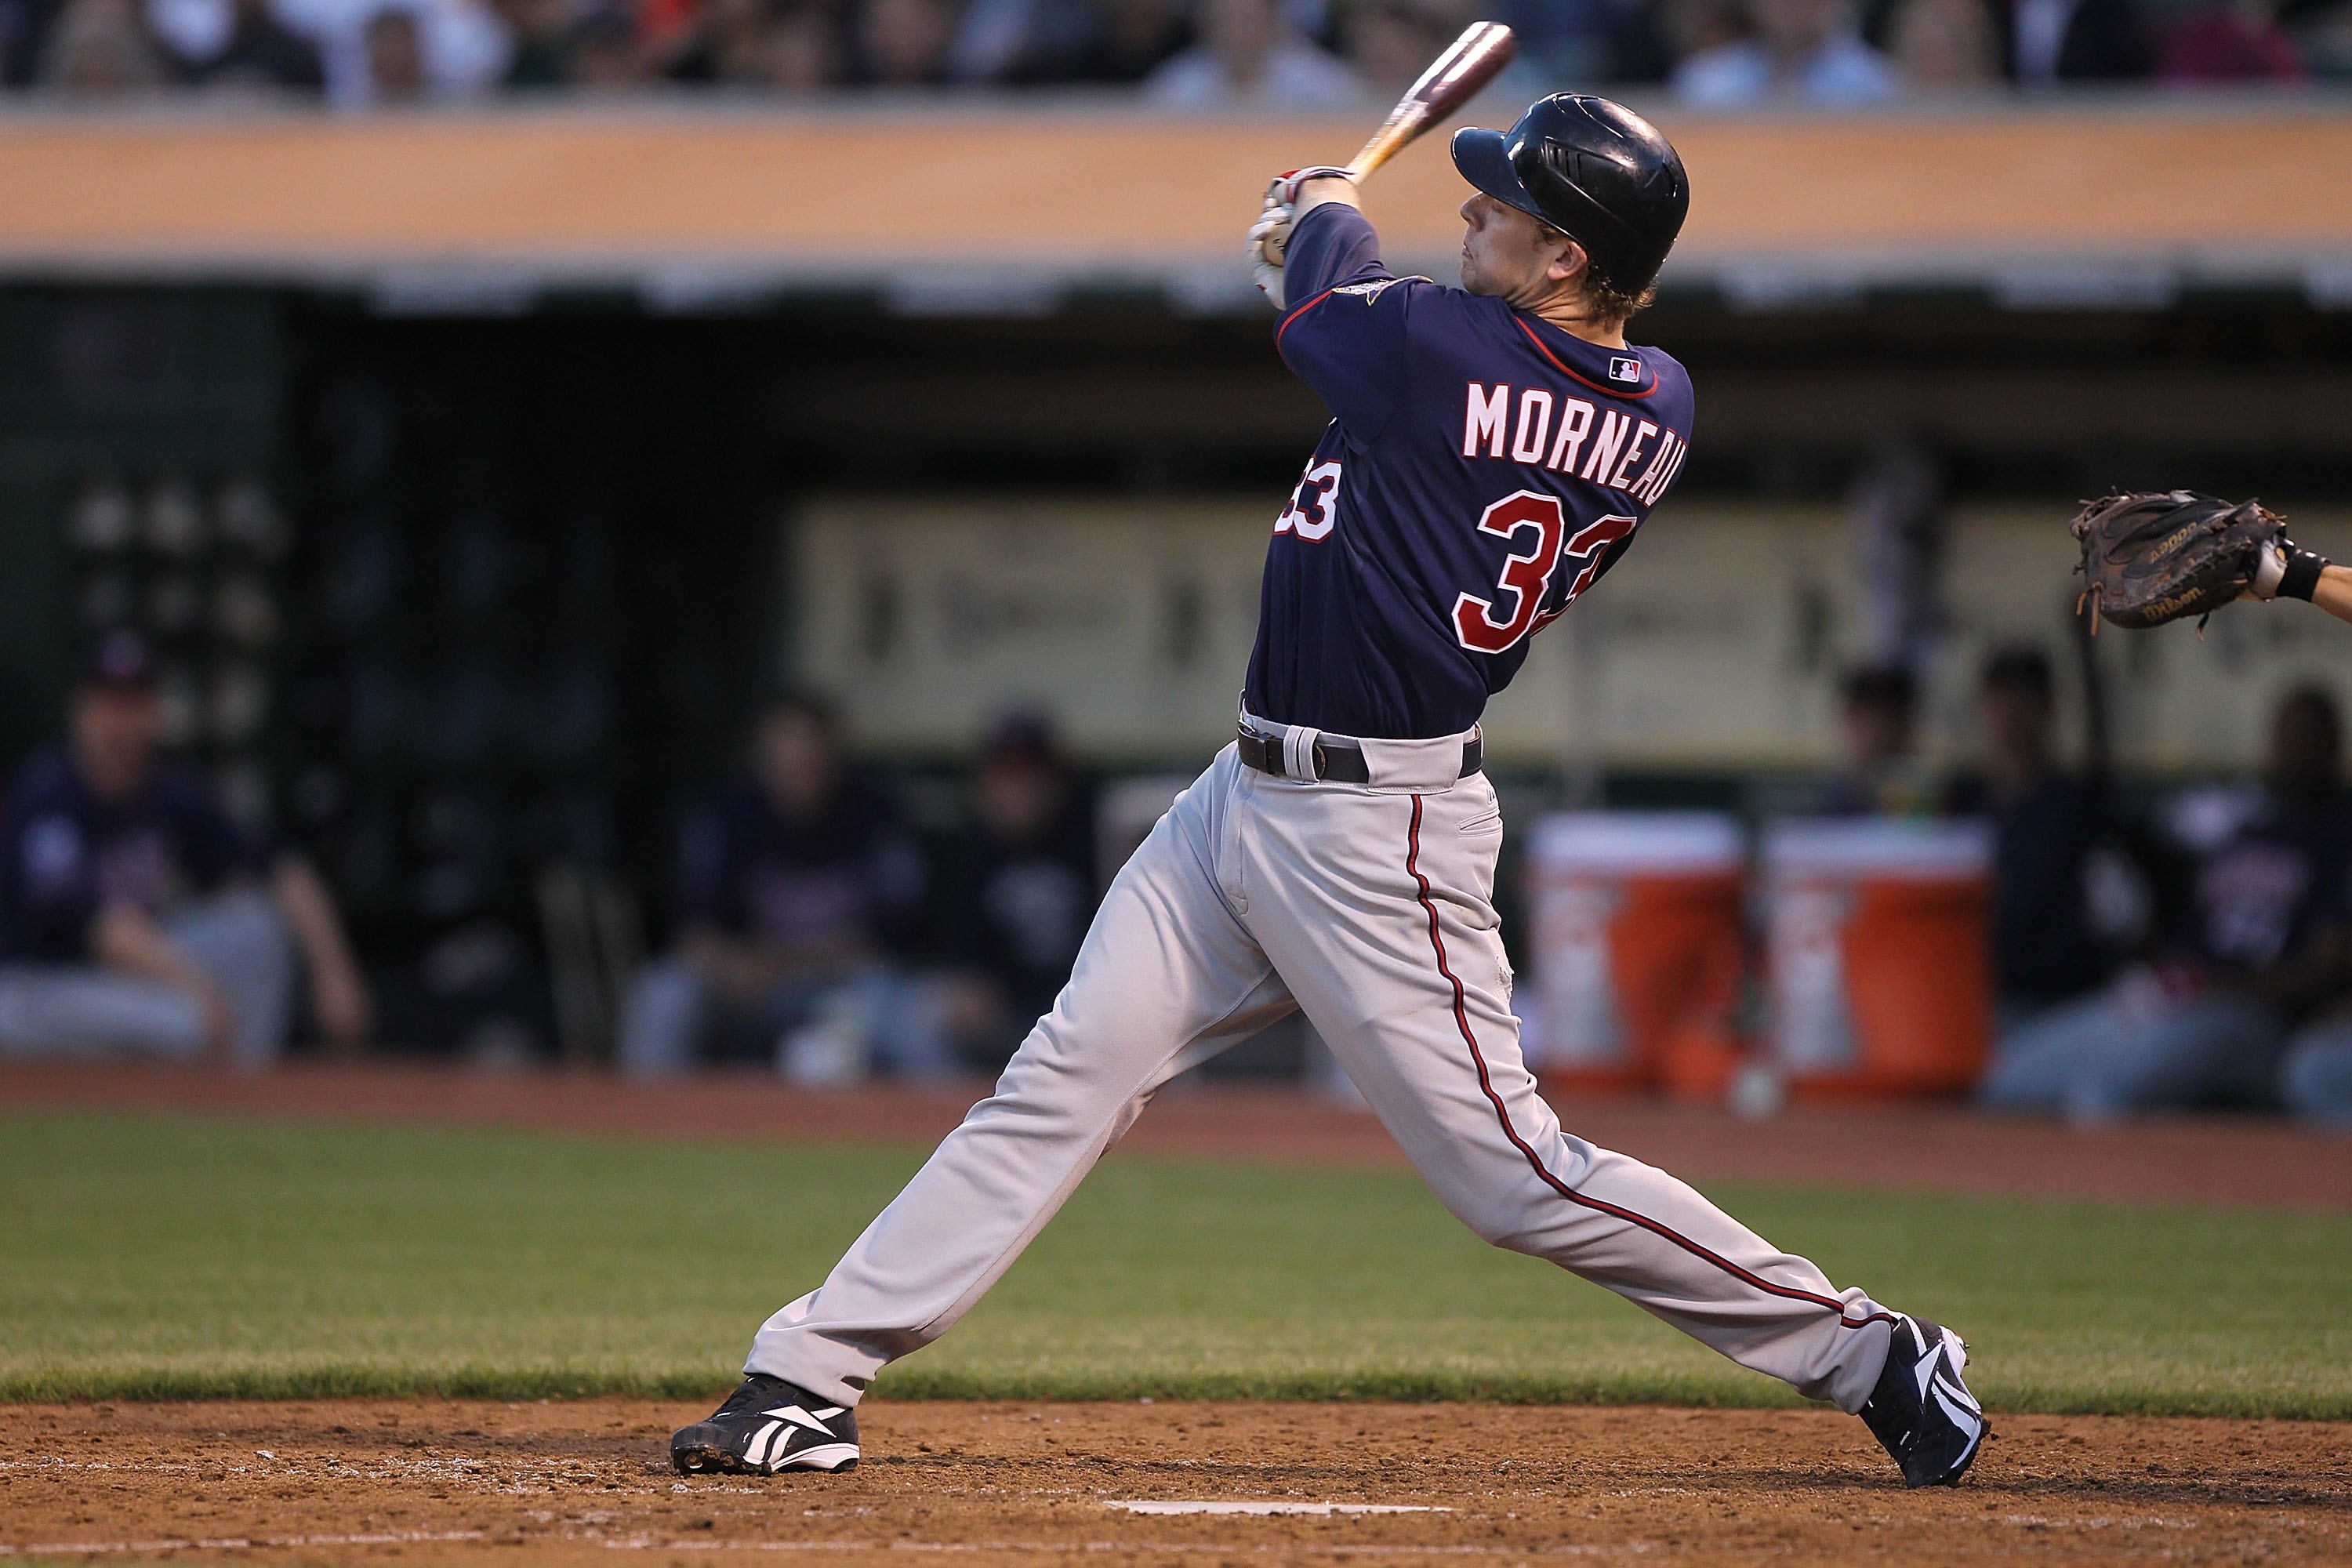 Colorado management believes Justin Morneau can find his stroke